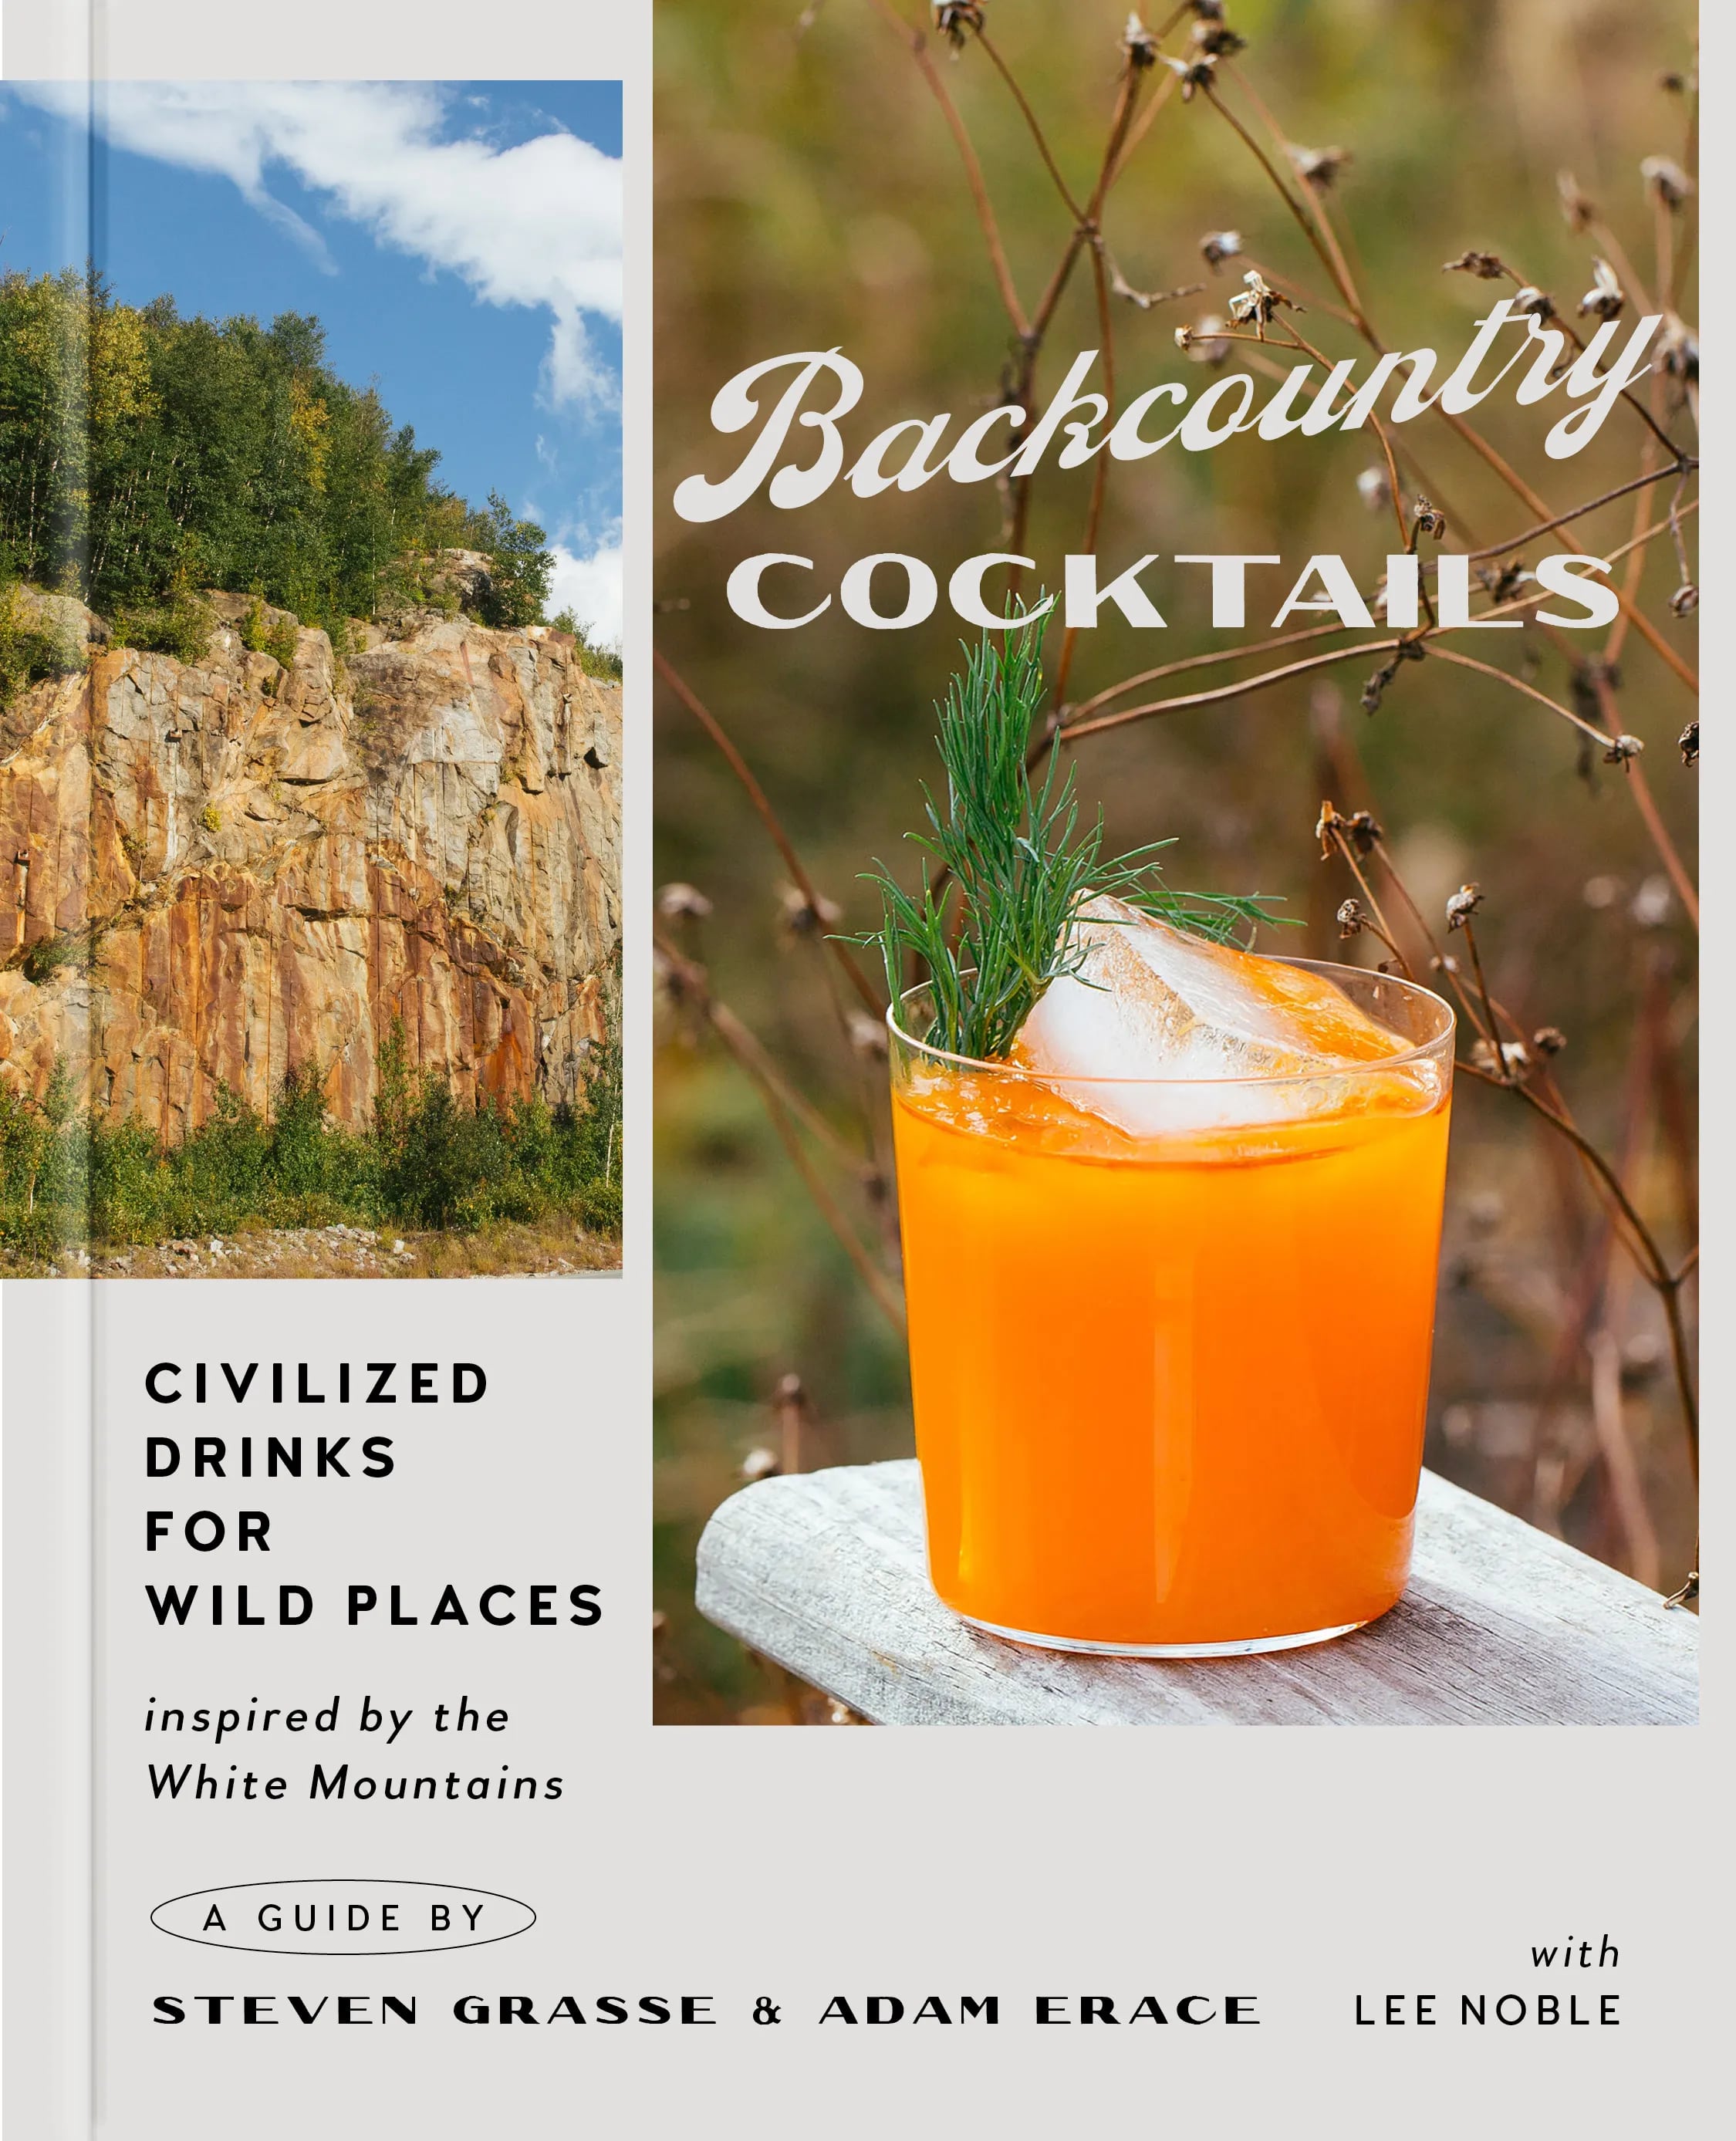 "Backcountry Cocktails: Civilized Drinks for Wild Places" by Steven Grasse and Adam Erace.